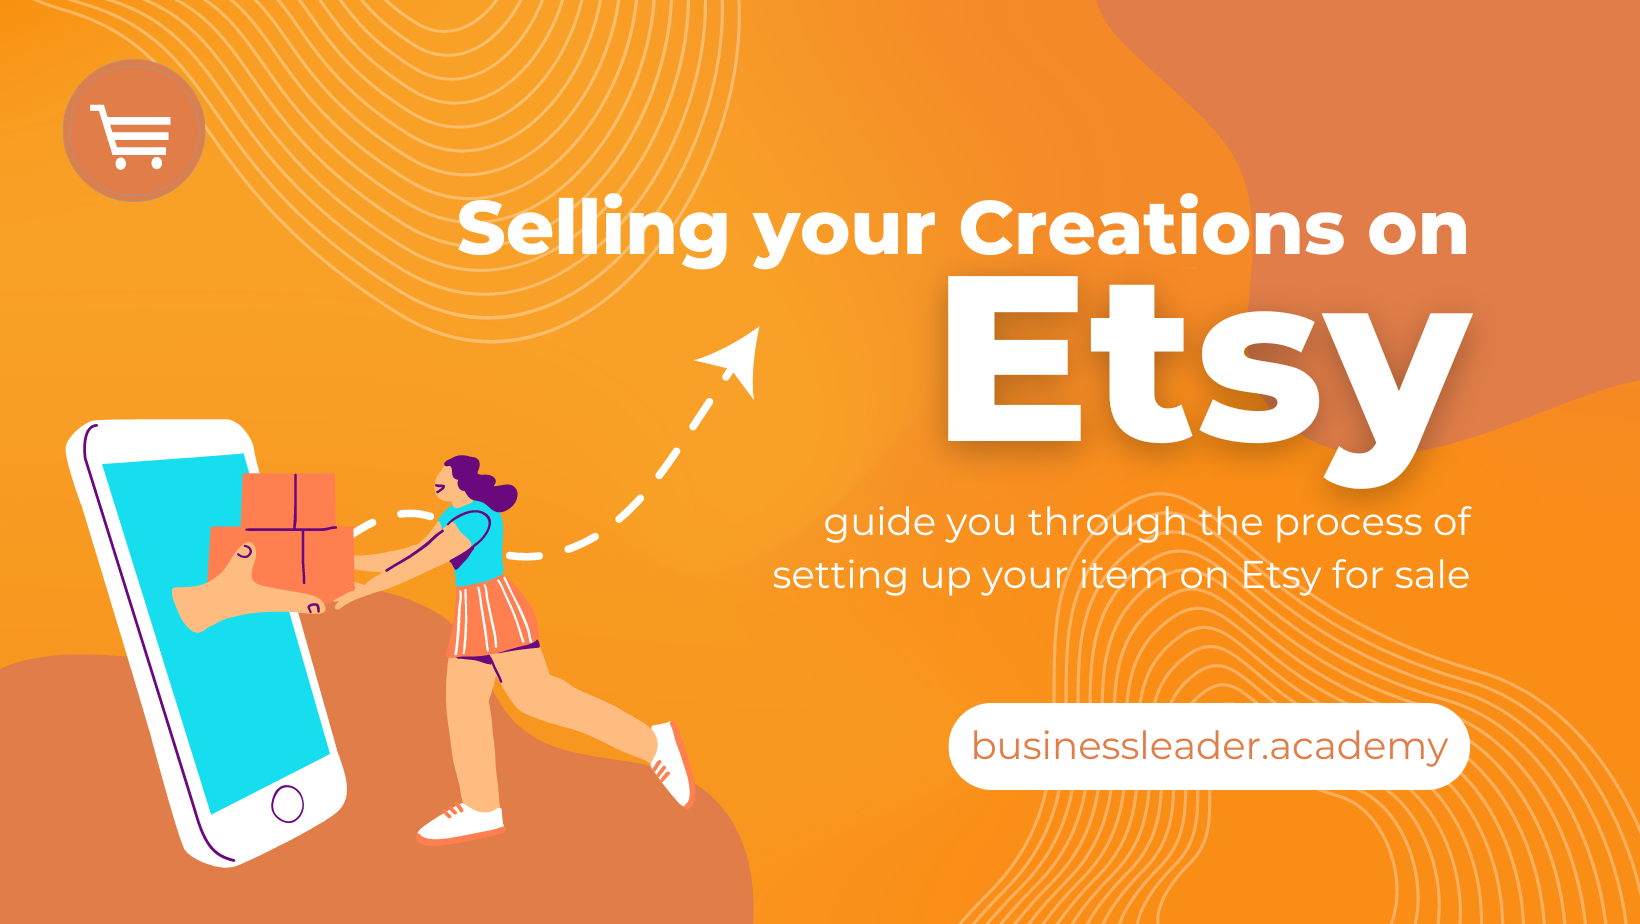 Sell your Creations on Etsy